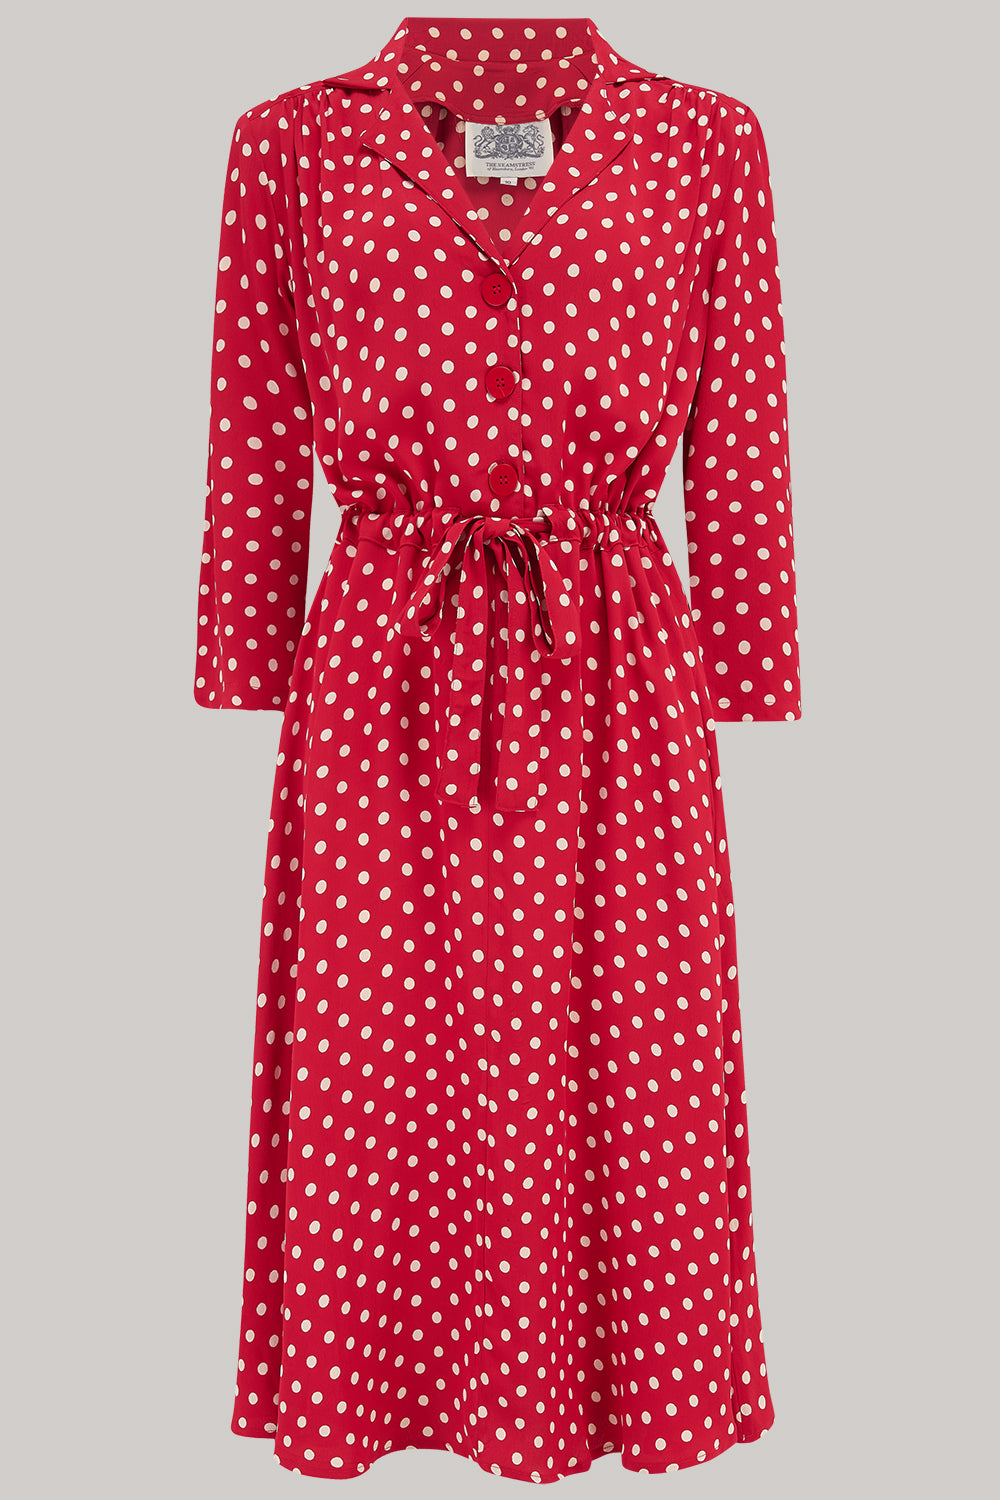 Polka Dot Dresses: 20s, 30s, 40s, 50s, 60s Milly dress in Red Polka  A Classic 1940s Inspired Day dress True Vintage Style £79.95 AT vintagedancer.com